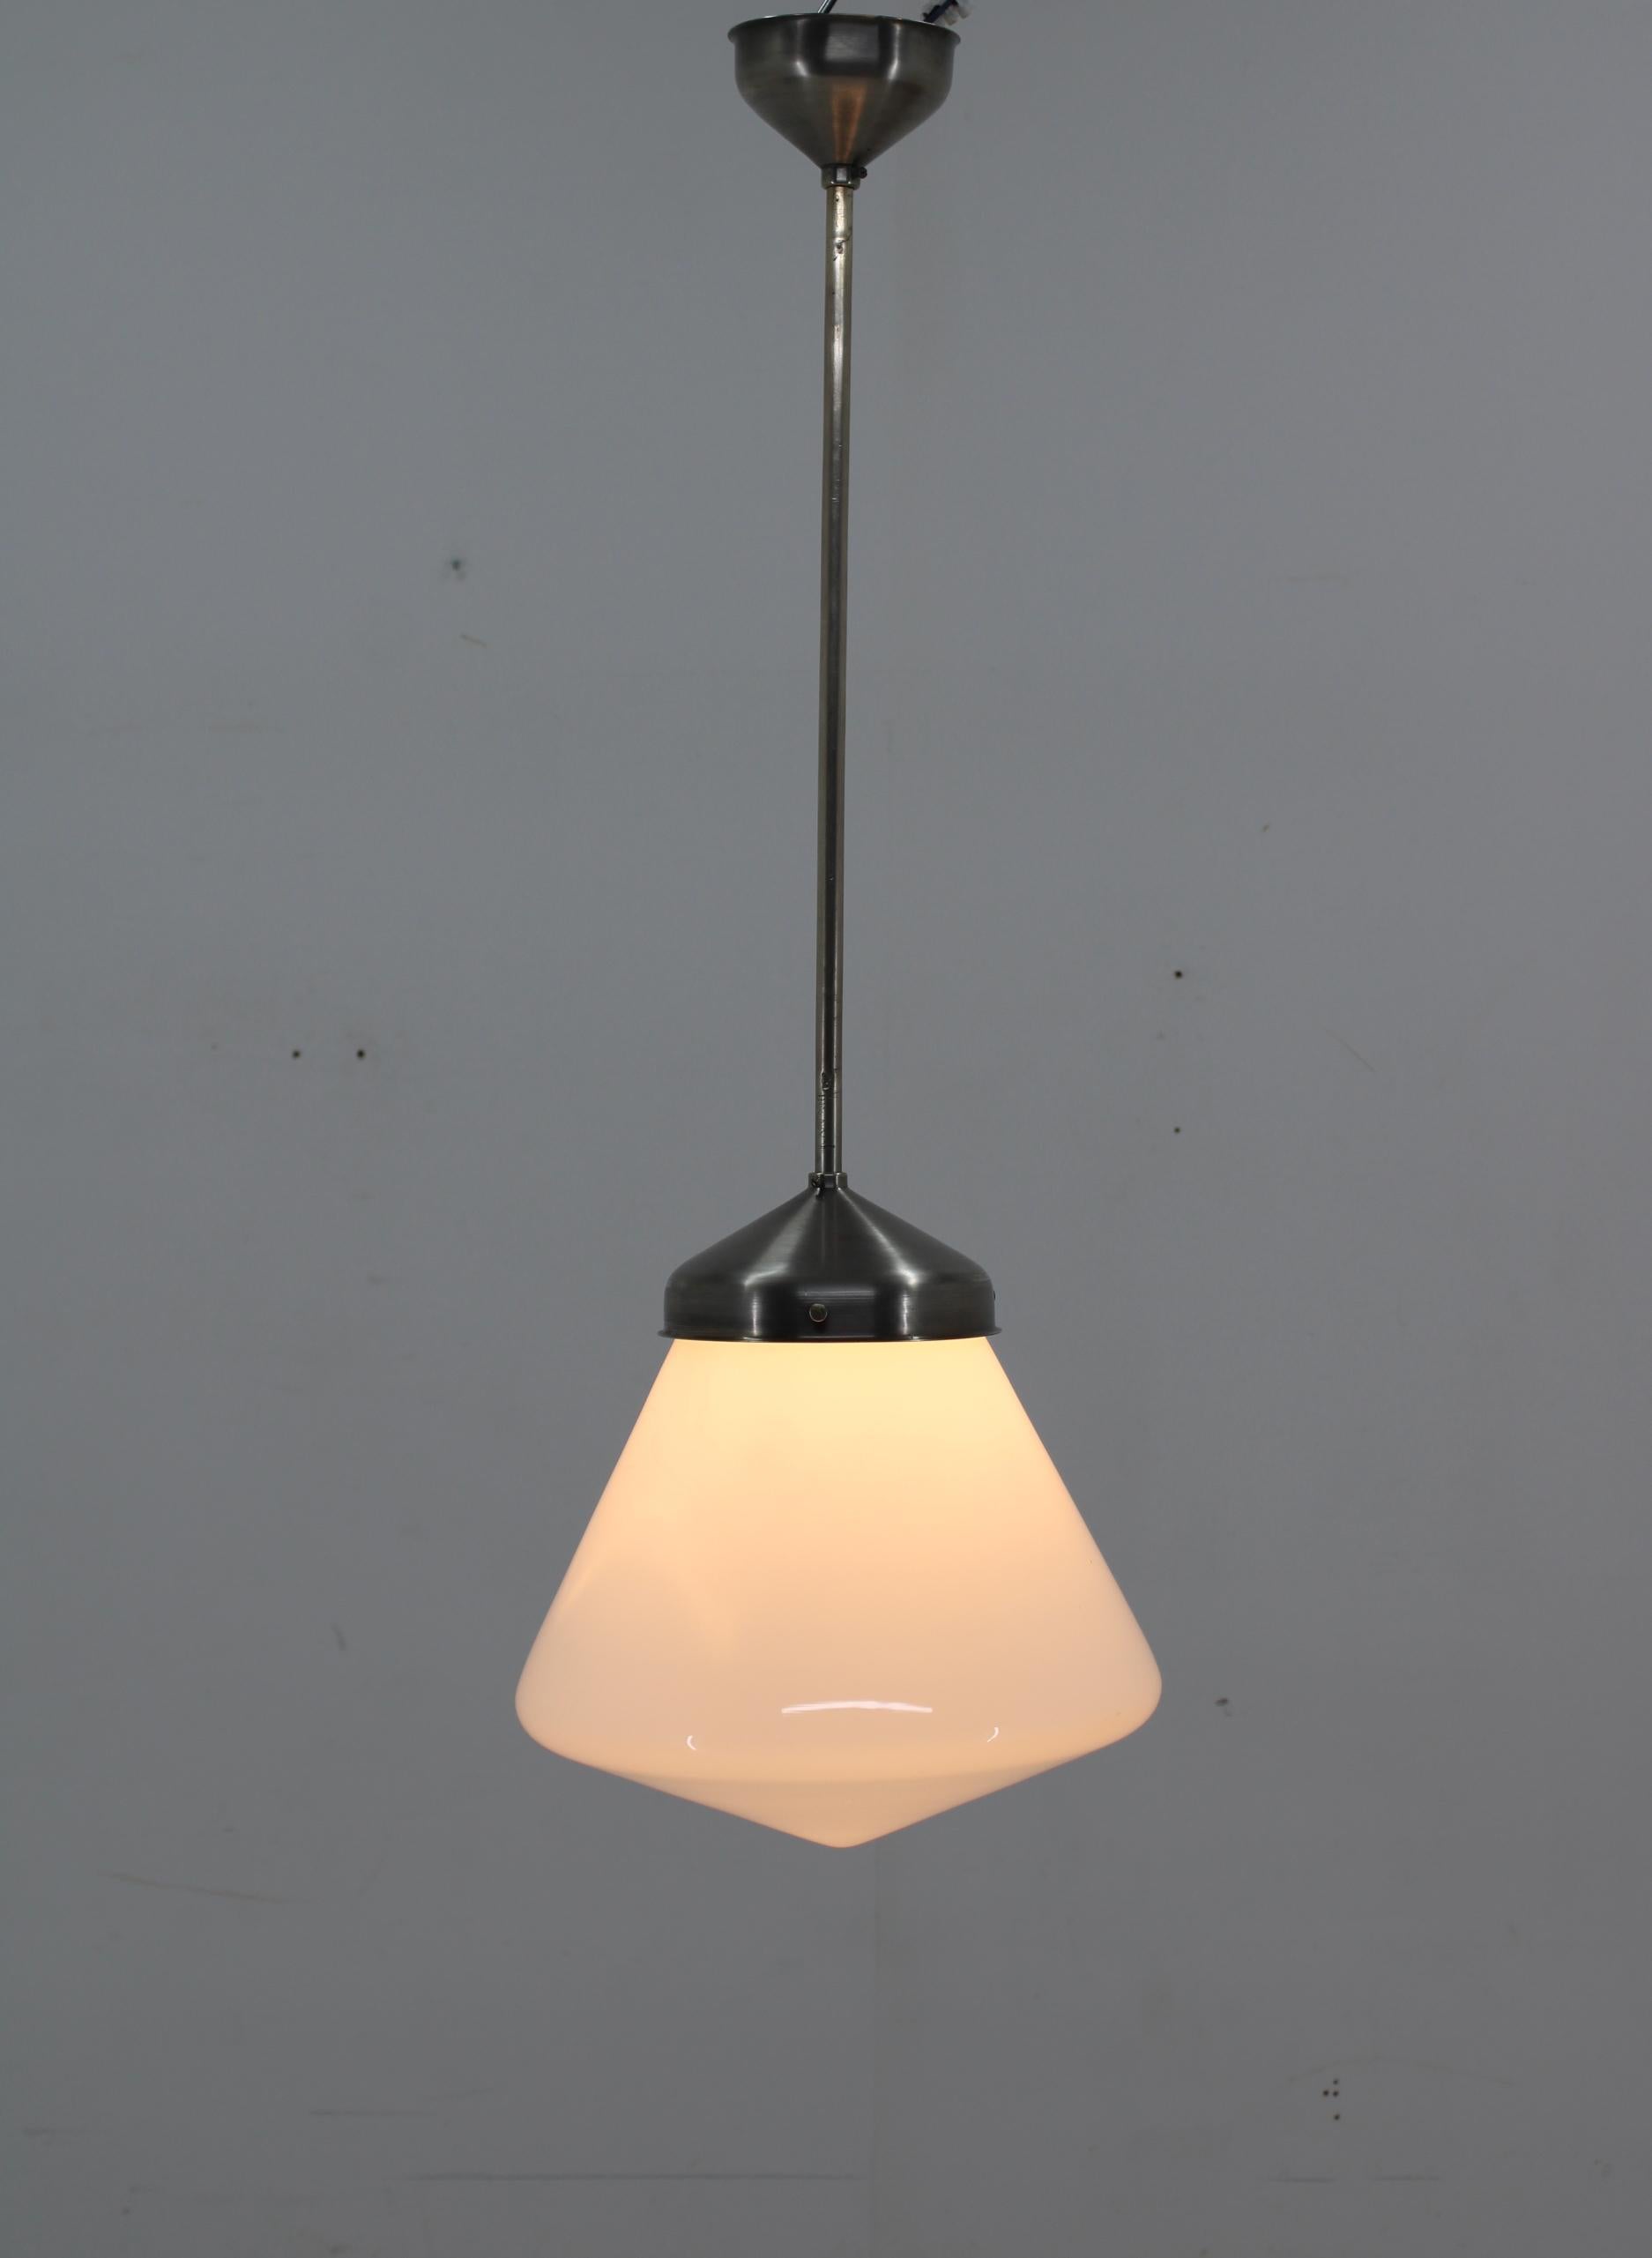 Adjustable height - min height 75cm, max height - 85cm.
Very good original condition.
Few scratches on glass shade visible on pictures.
Cleaned, rewired: 1x60W, E25-E27 bulb
US wiring compatible